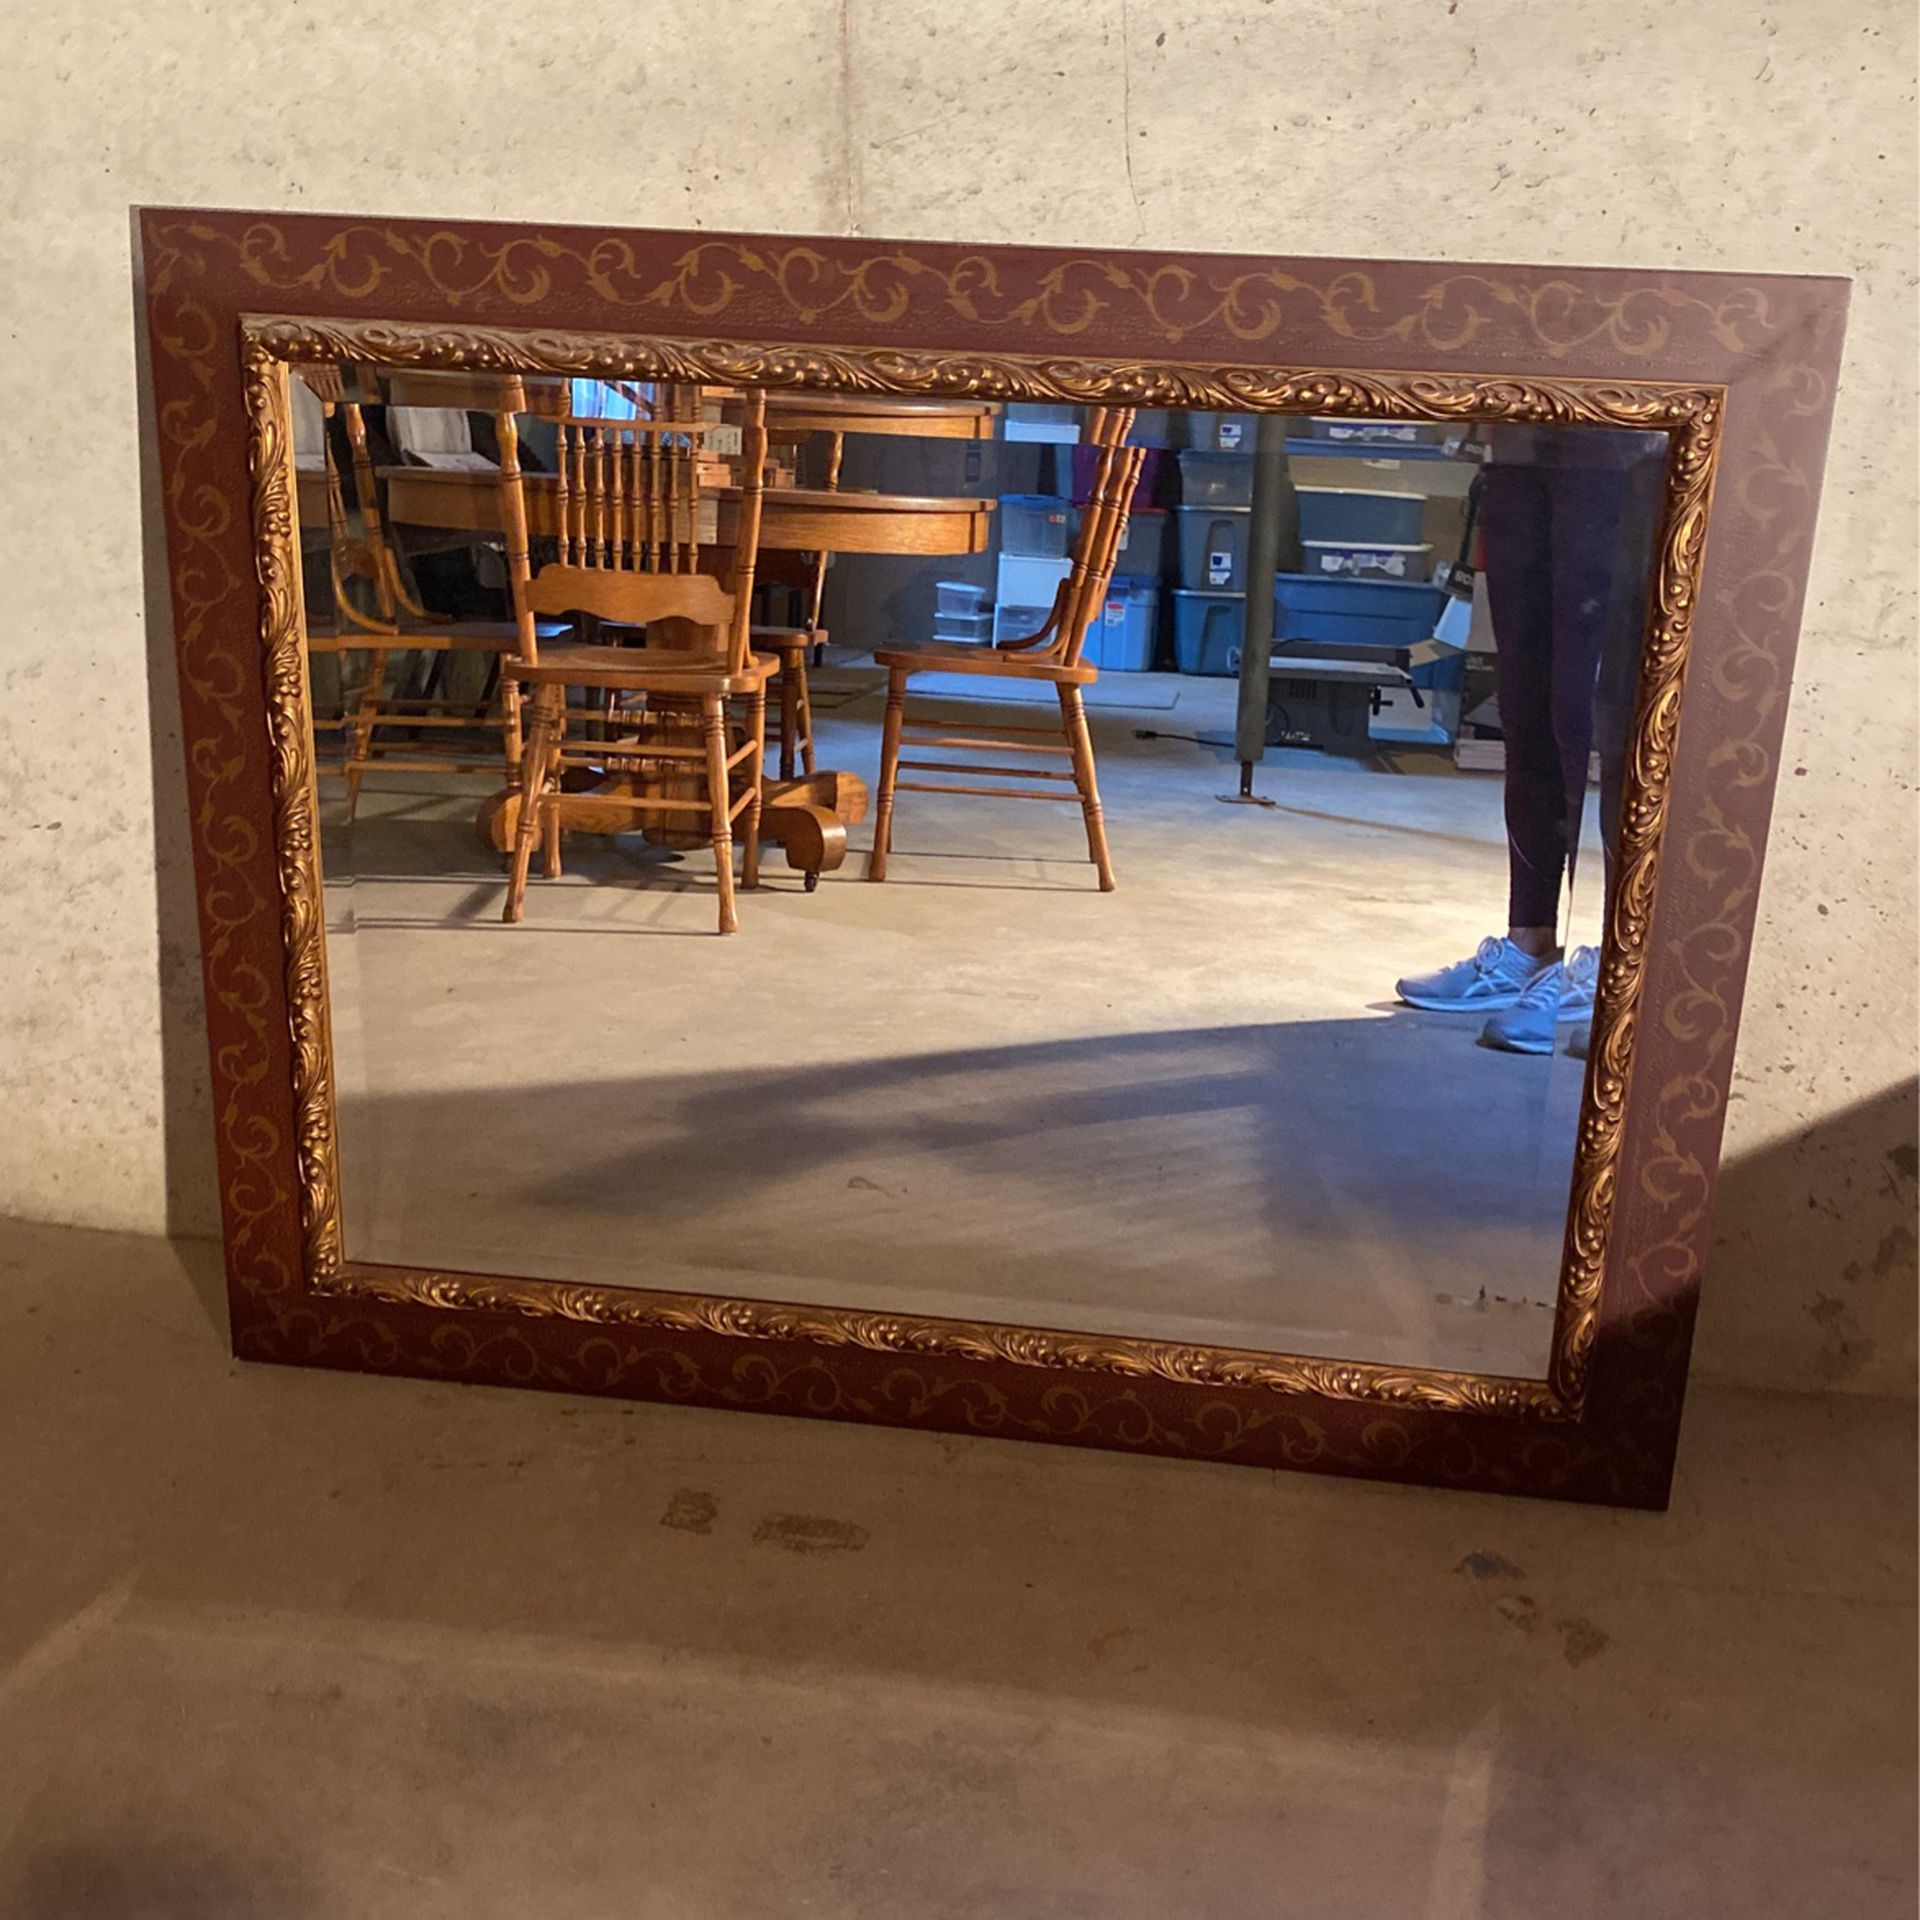 Large Beautiful Wall Mirror In A Gold Enlay Frame  Size Is 60”x80”